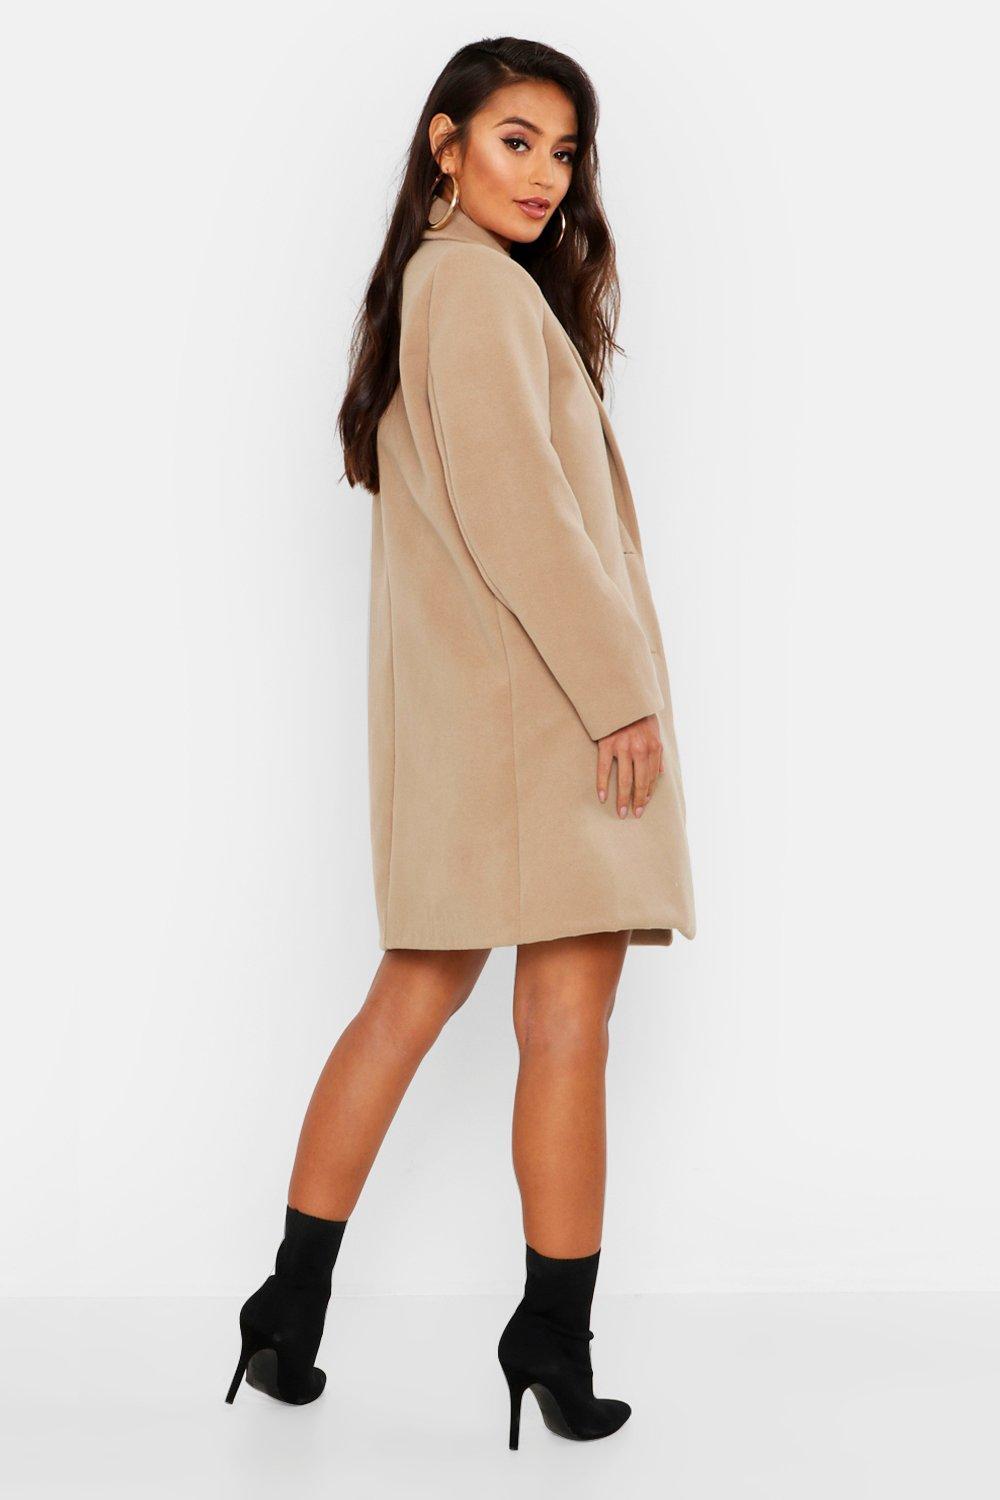 Boohoo Petite Button Detail Camel Duster Coat in Beige (Natural) - Lyst